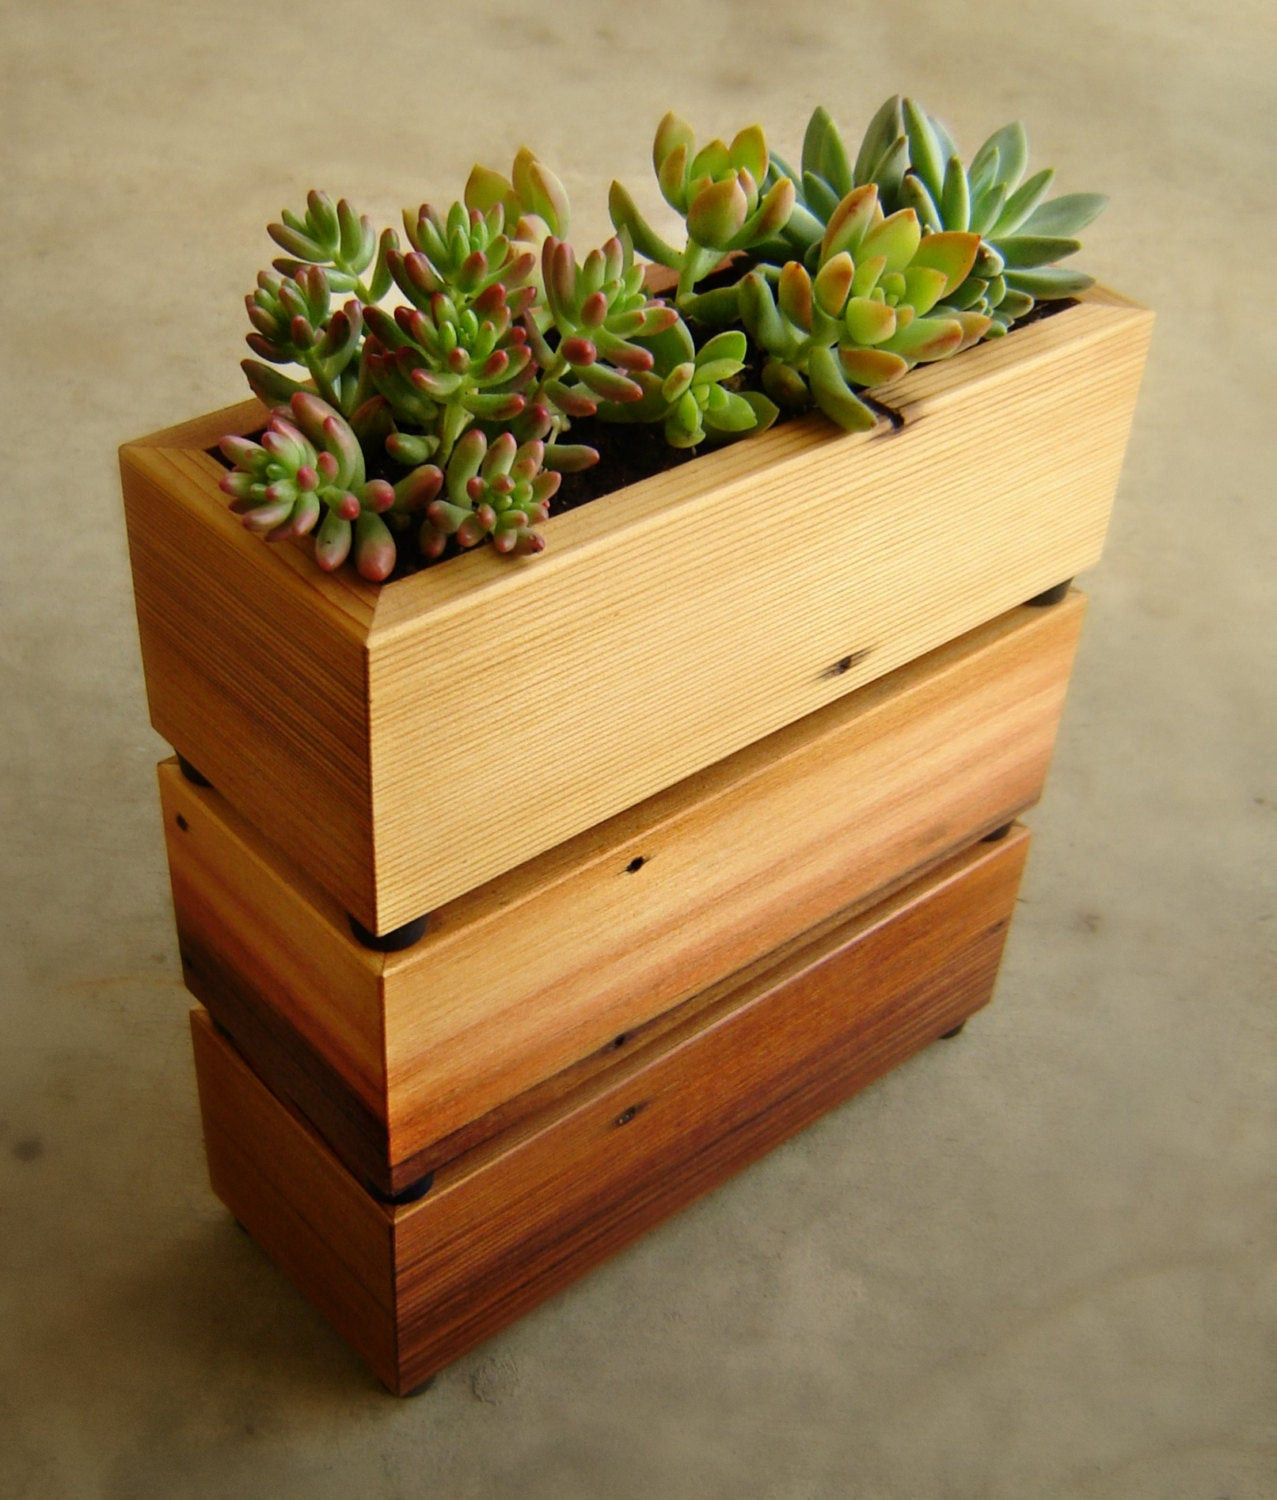 Best ideas about Succulent Planter Box
. Save or Pin Succulent Planter Box in Recycled Cedar With Gravel and Soil Now.